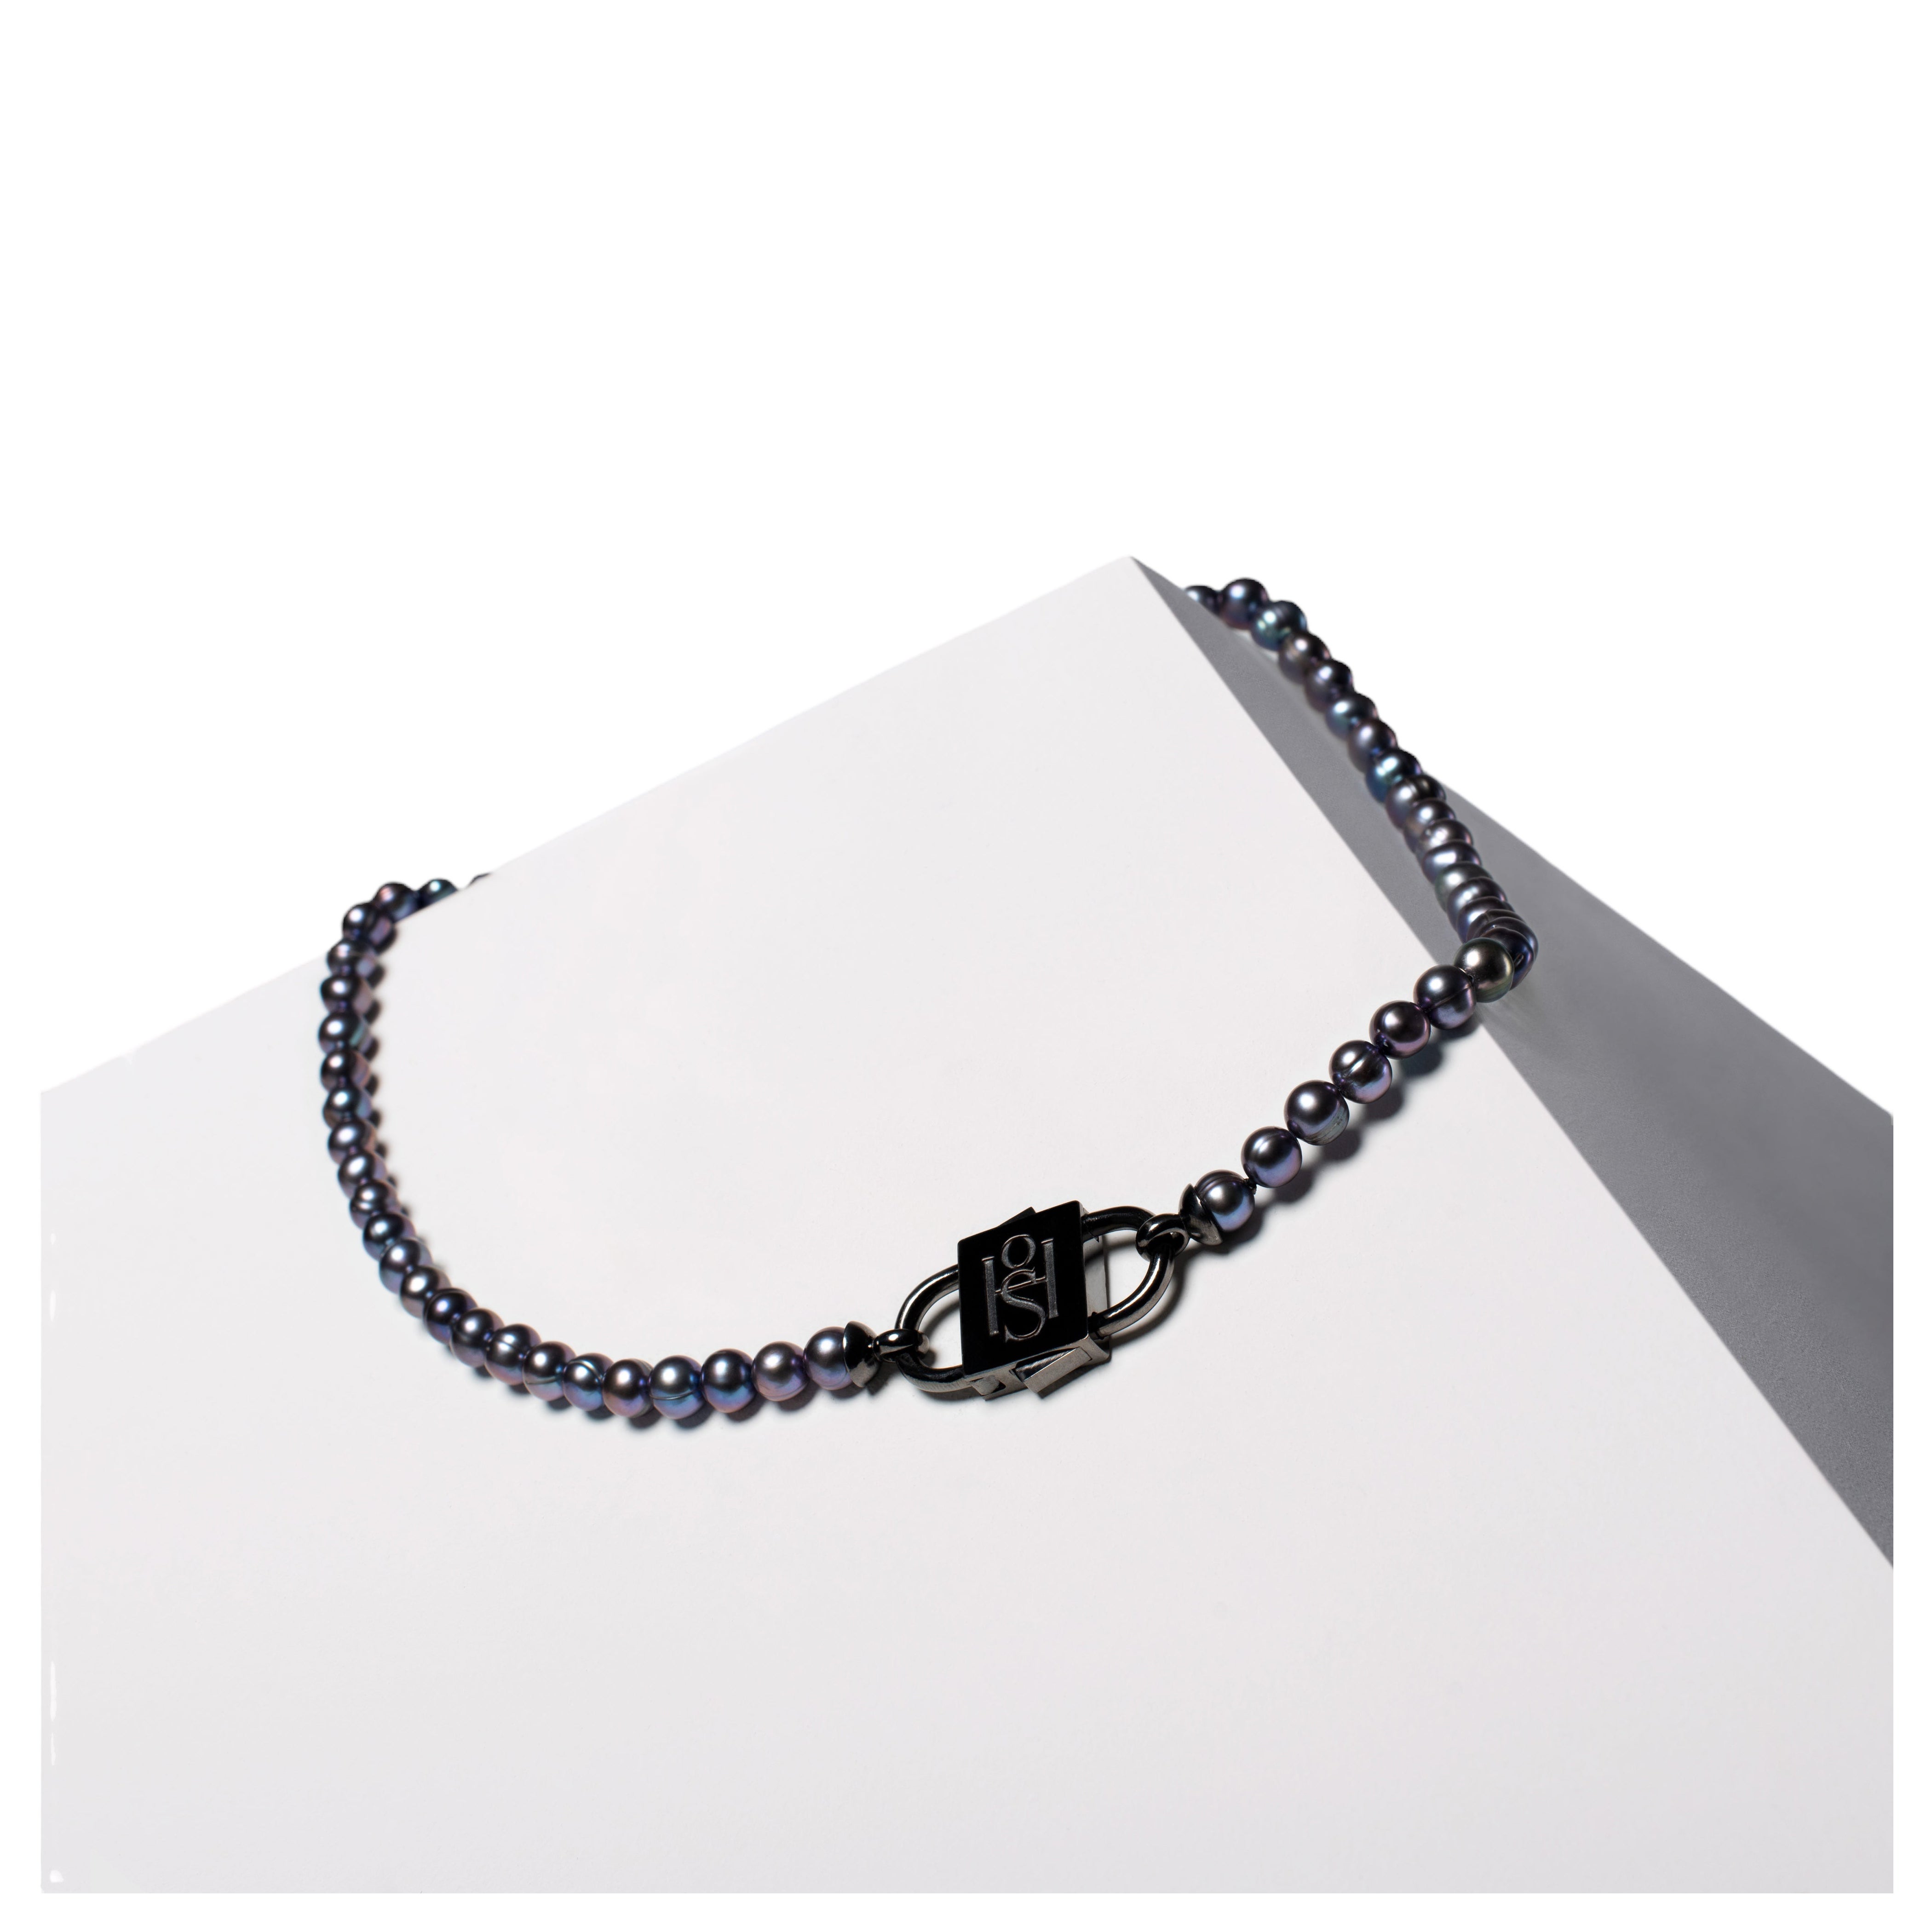 House of Sol Peacock Black Pearl Necklace with Rhodium filled HoS Lock For Sale